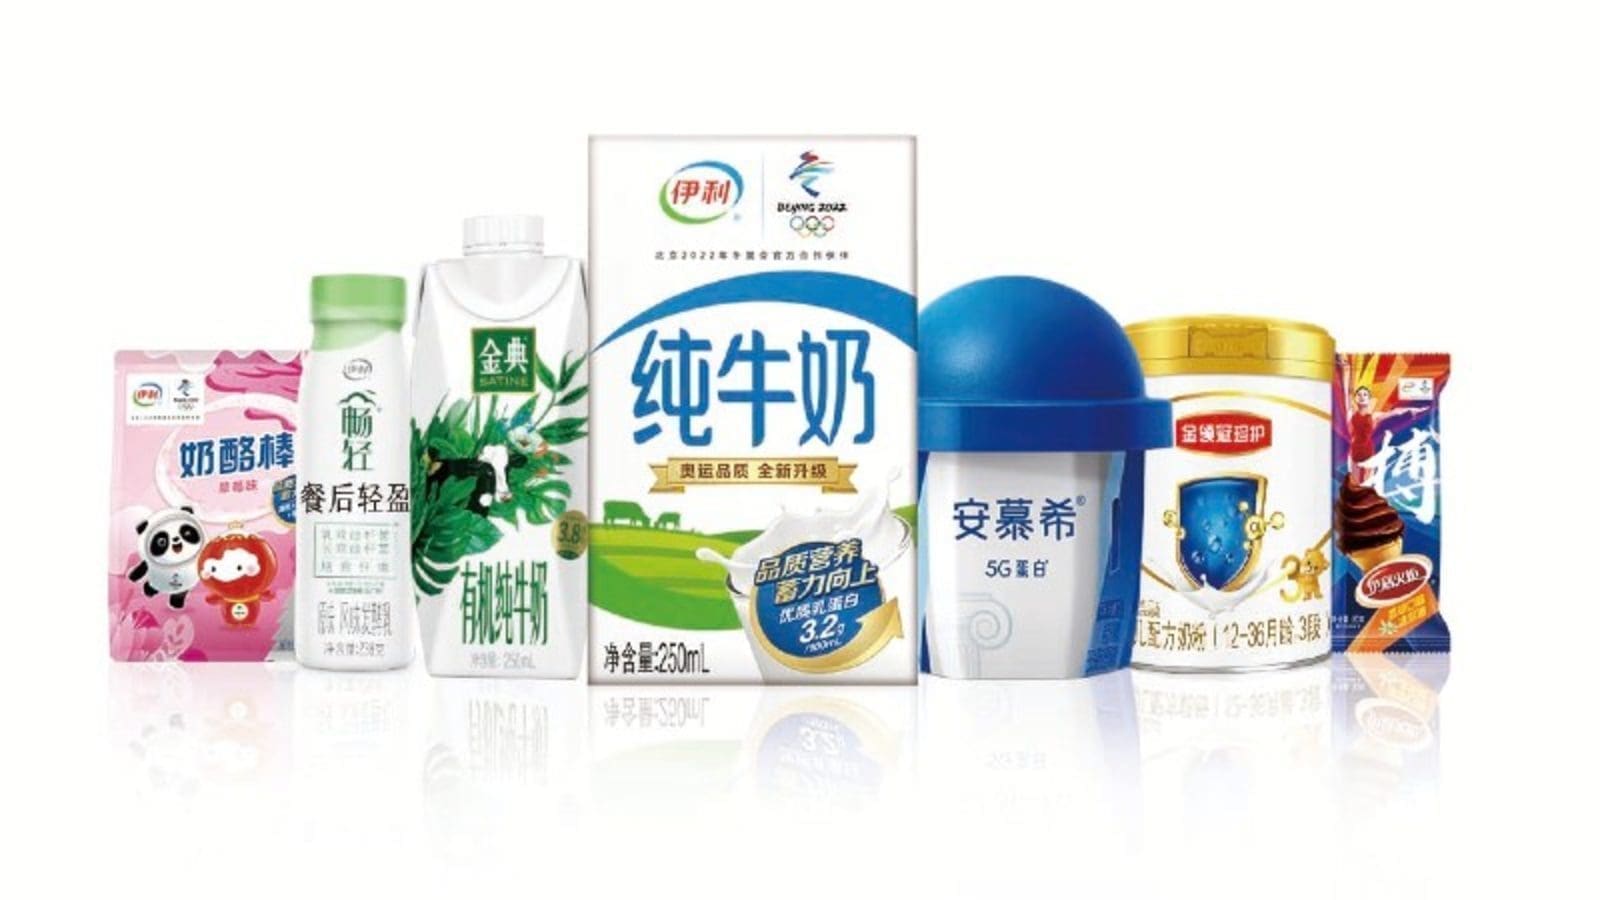 Yili reports new heights of 12.31% rise in H1 revenue, the fastest growth rate in dairy industry